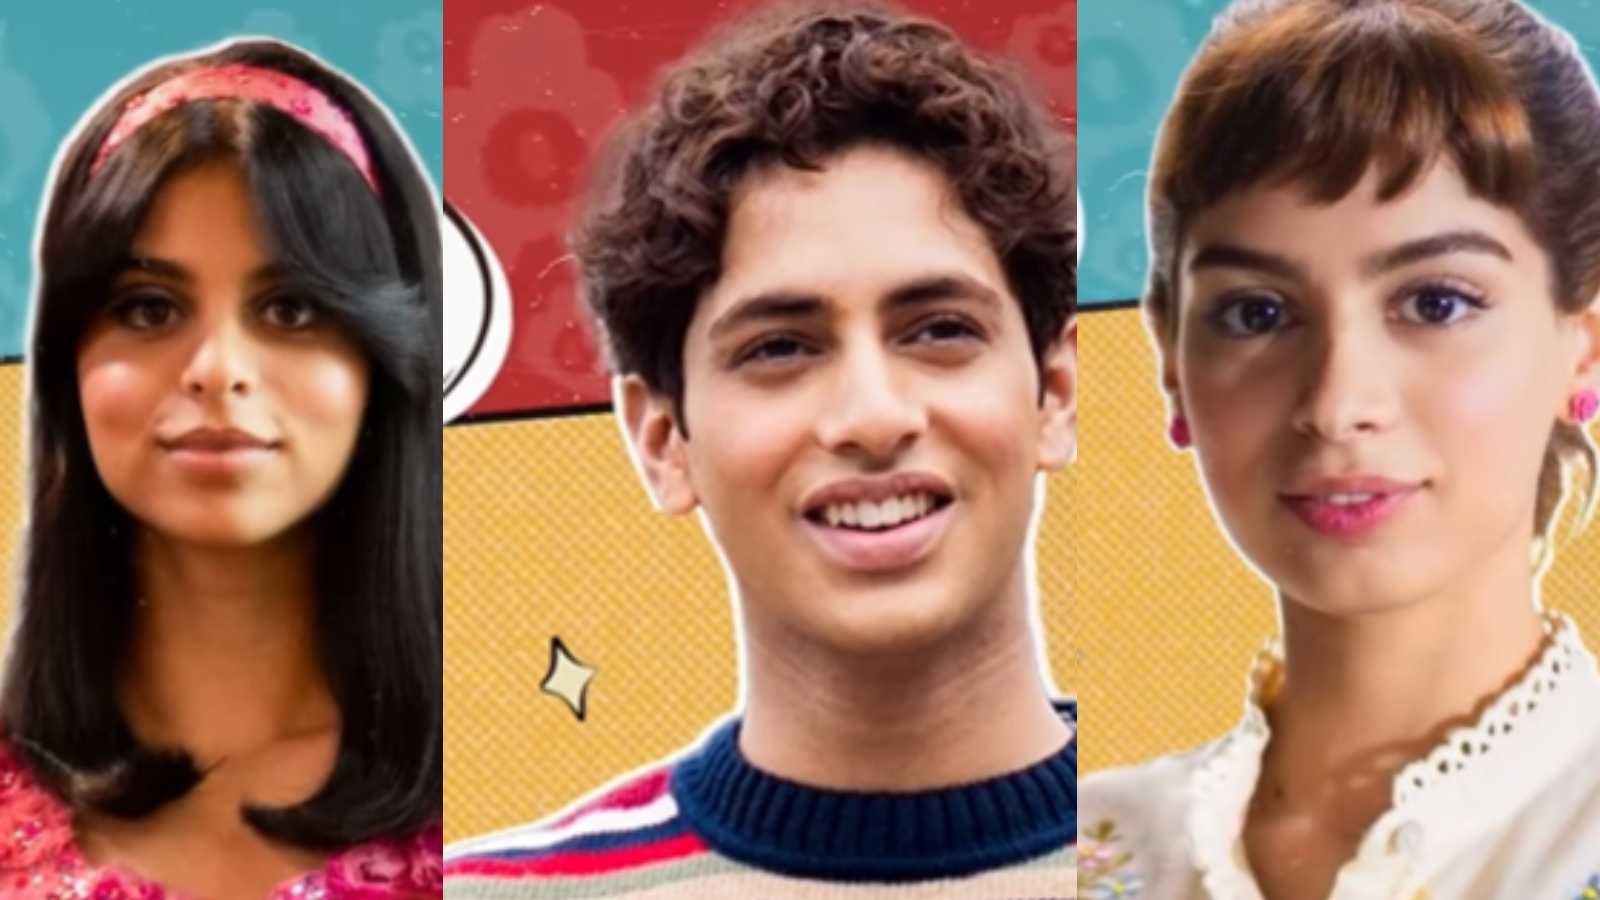 The Archies: Suhana Khan, Khushi Kapoor, Agastya Nanda are unrecognizable as Riverdale townies in first look